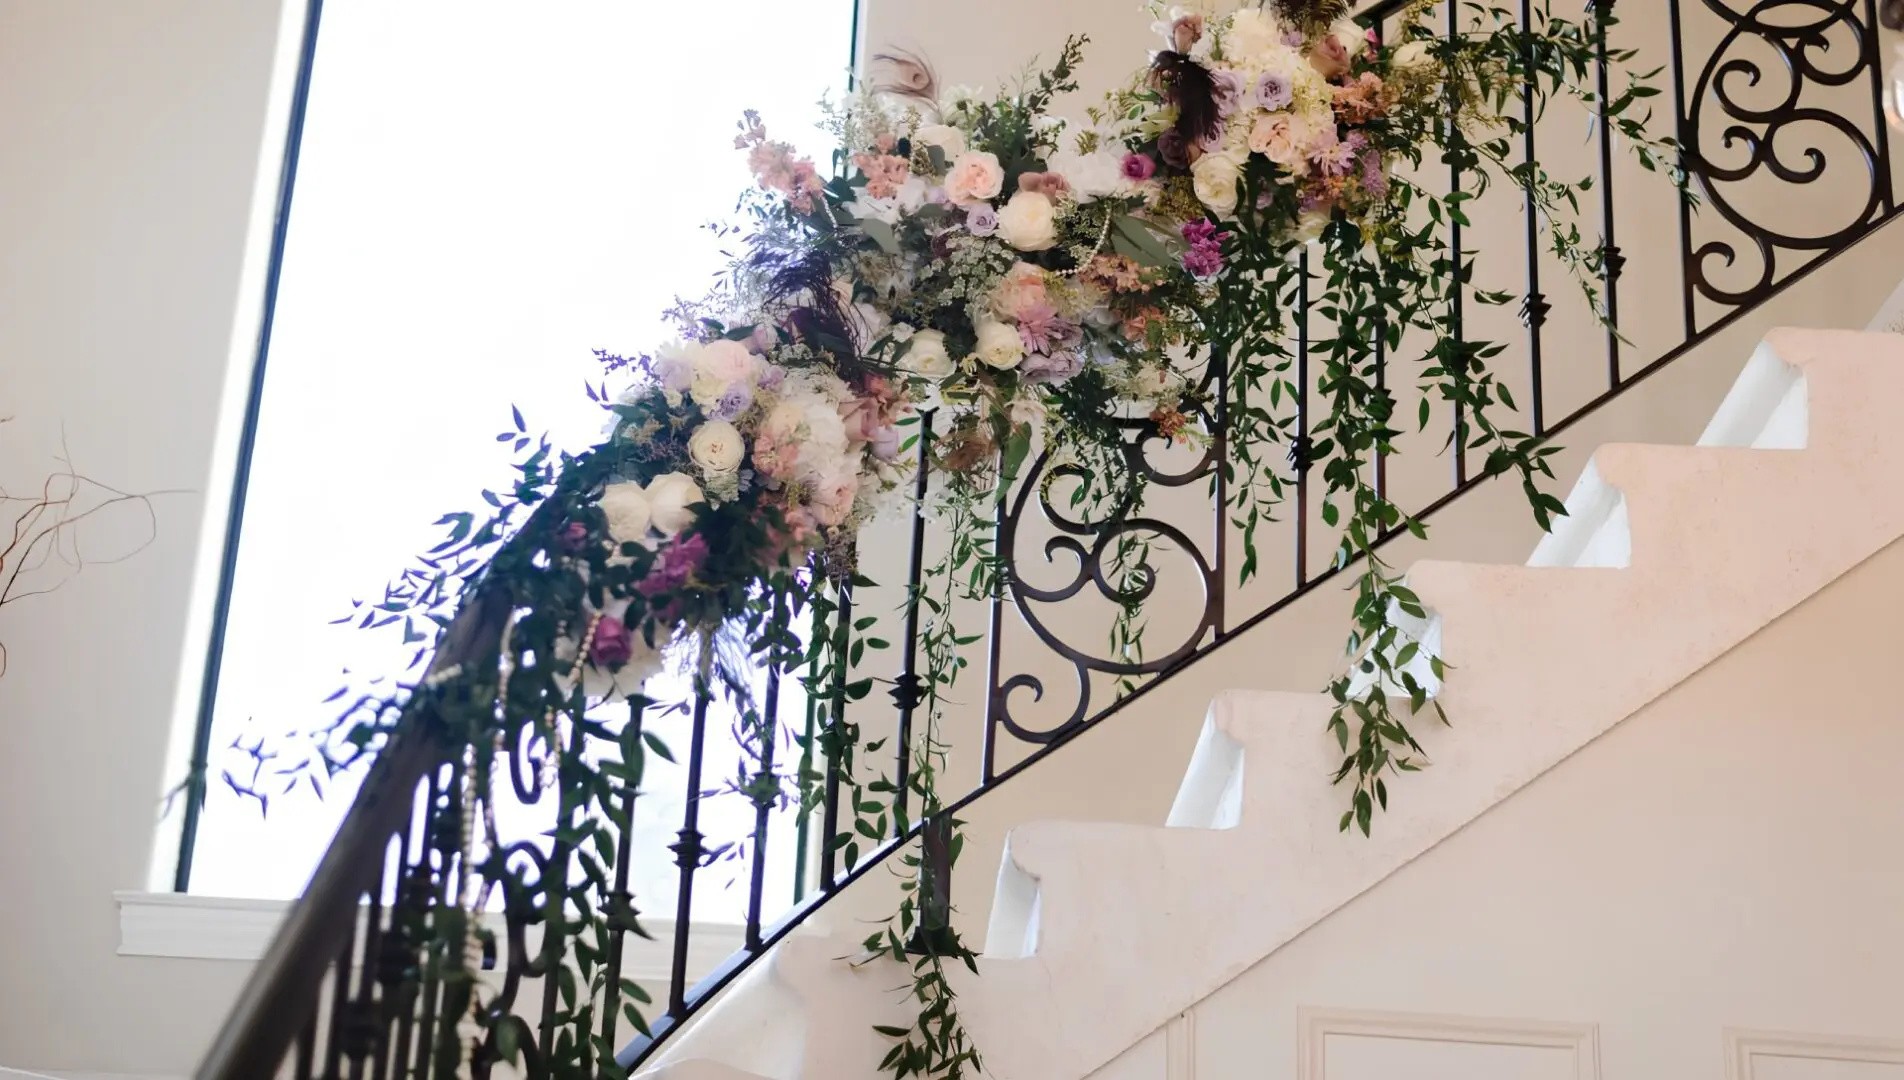 A staircase with flowers and vines on the railing.